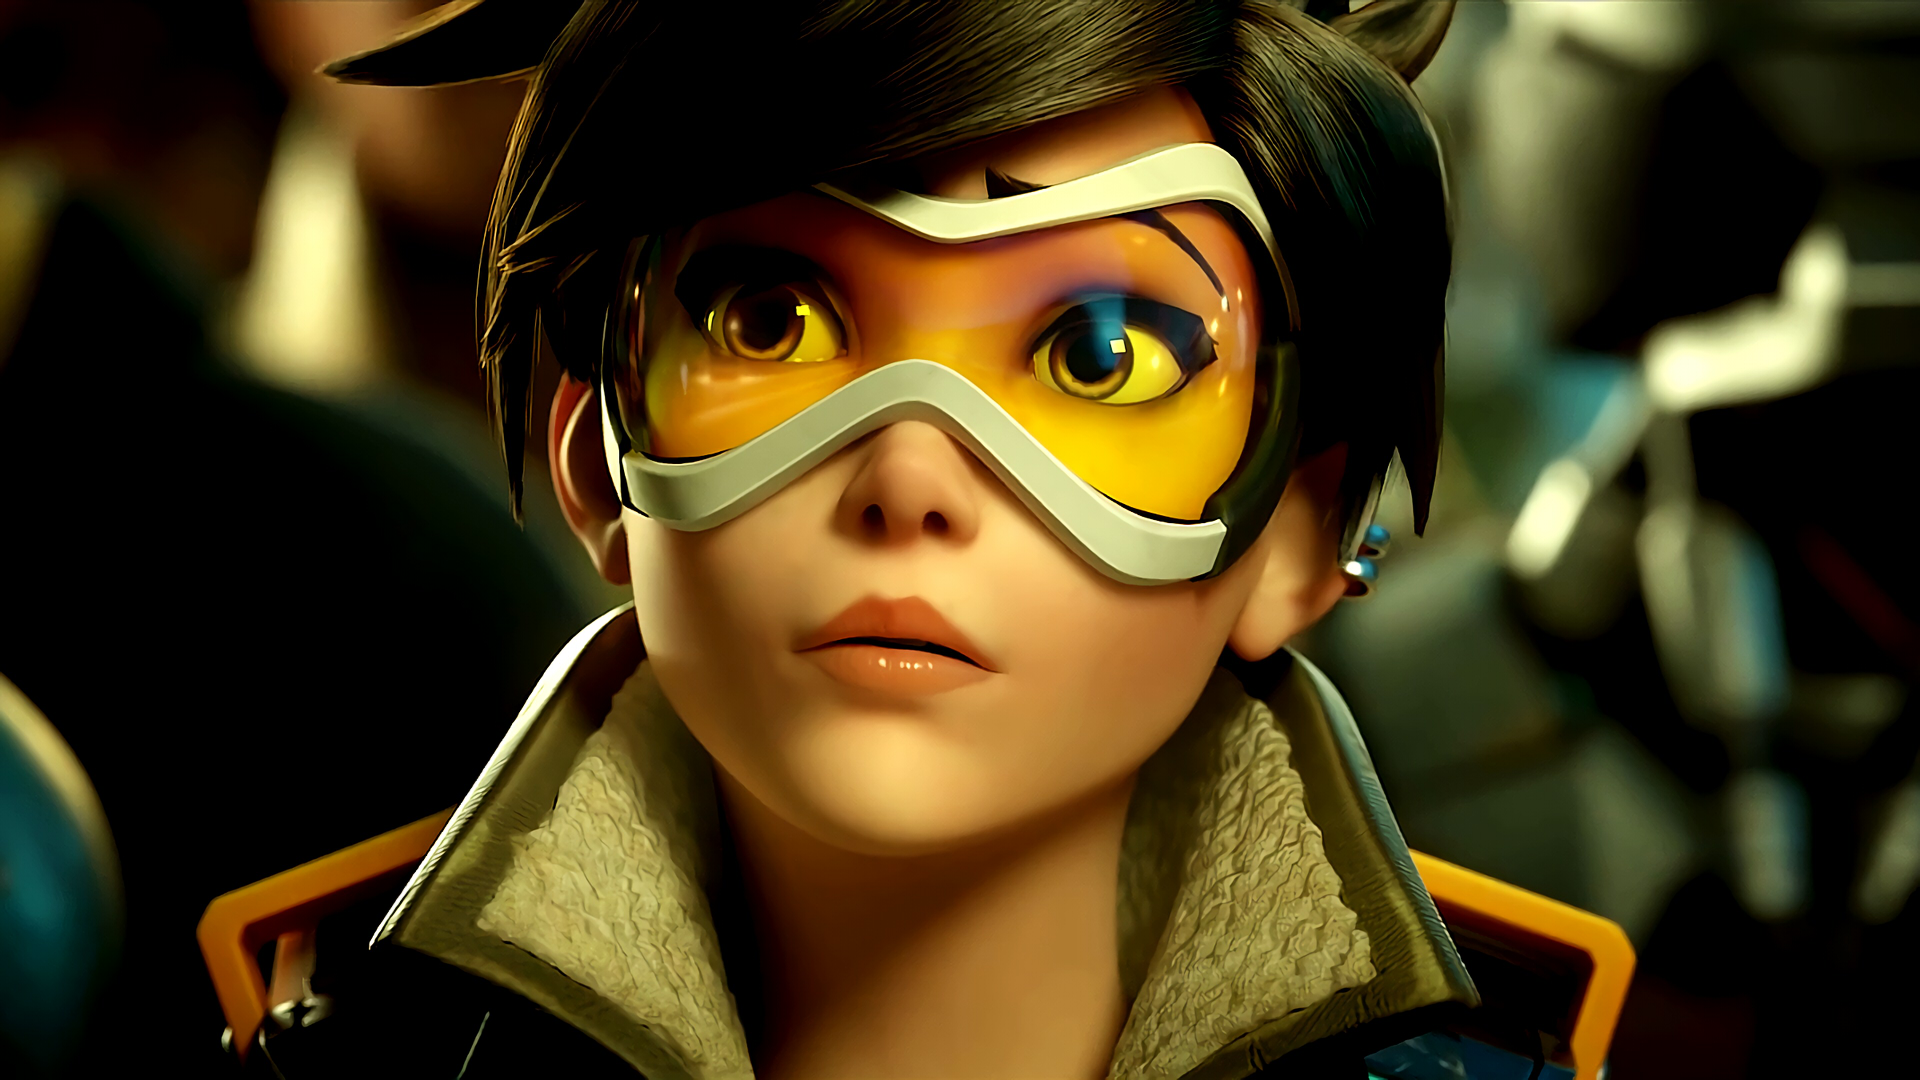 Overwatch 2 Won't Disable Tracer Over Damage Bug